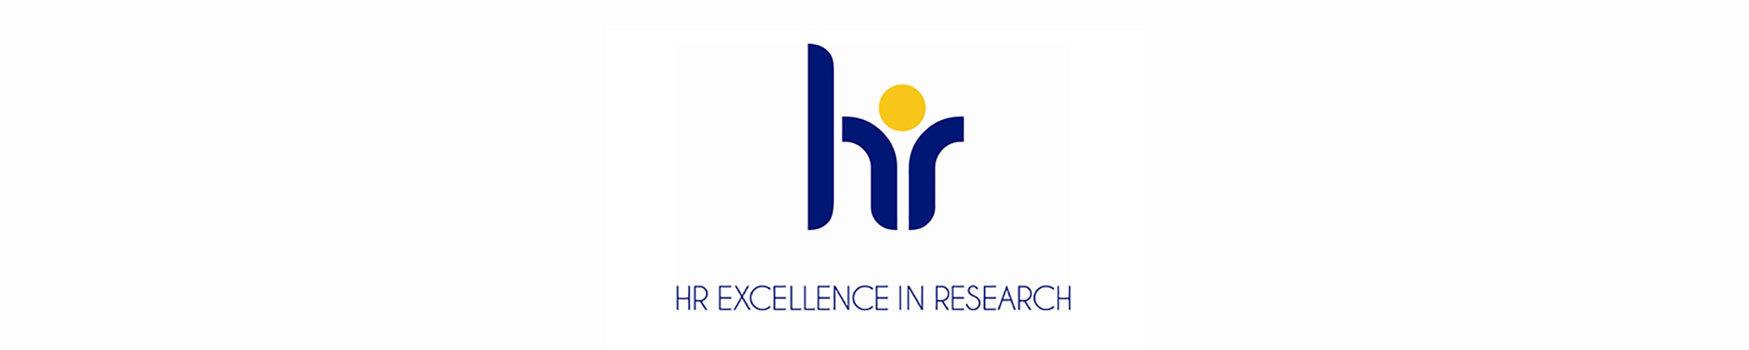 Logobanner HR EXCELLENCE IN RESEARCH